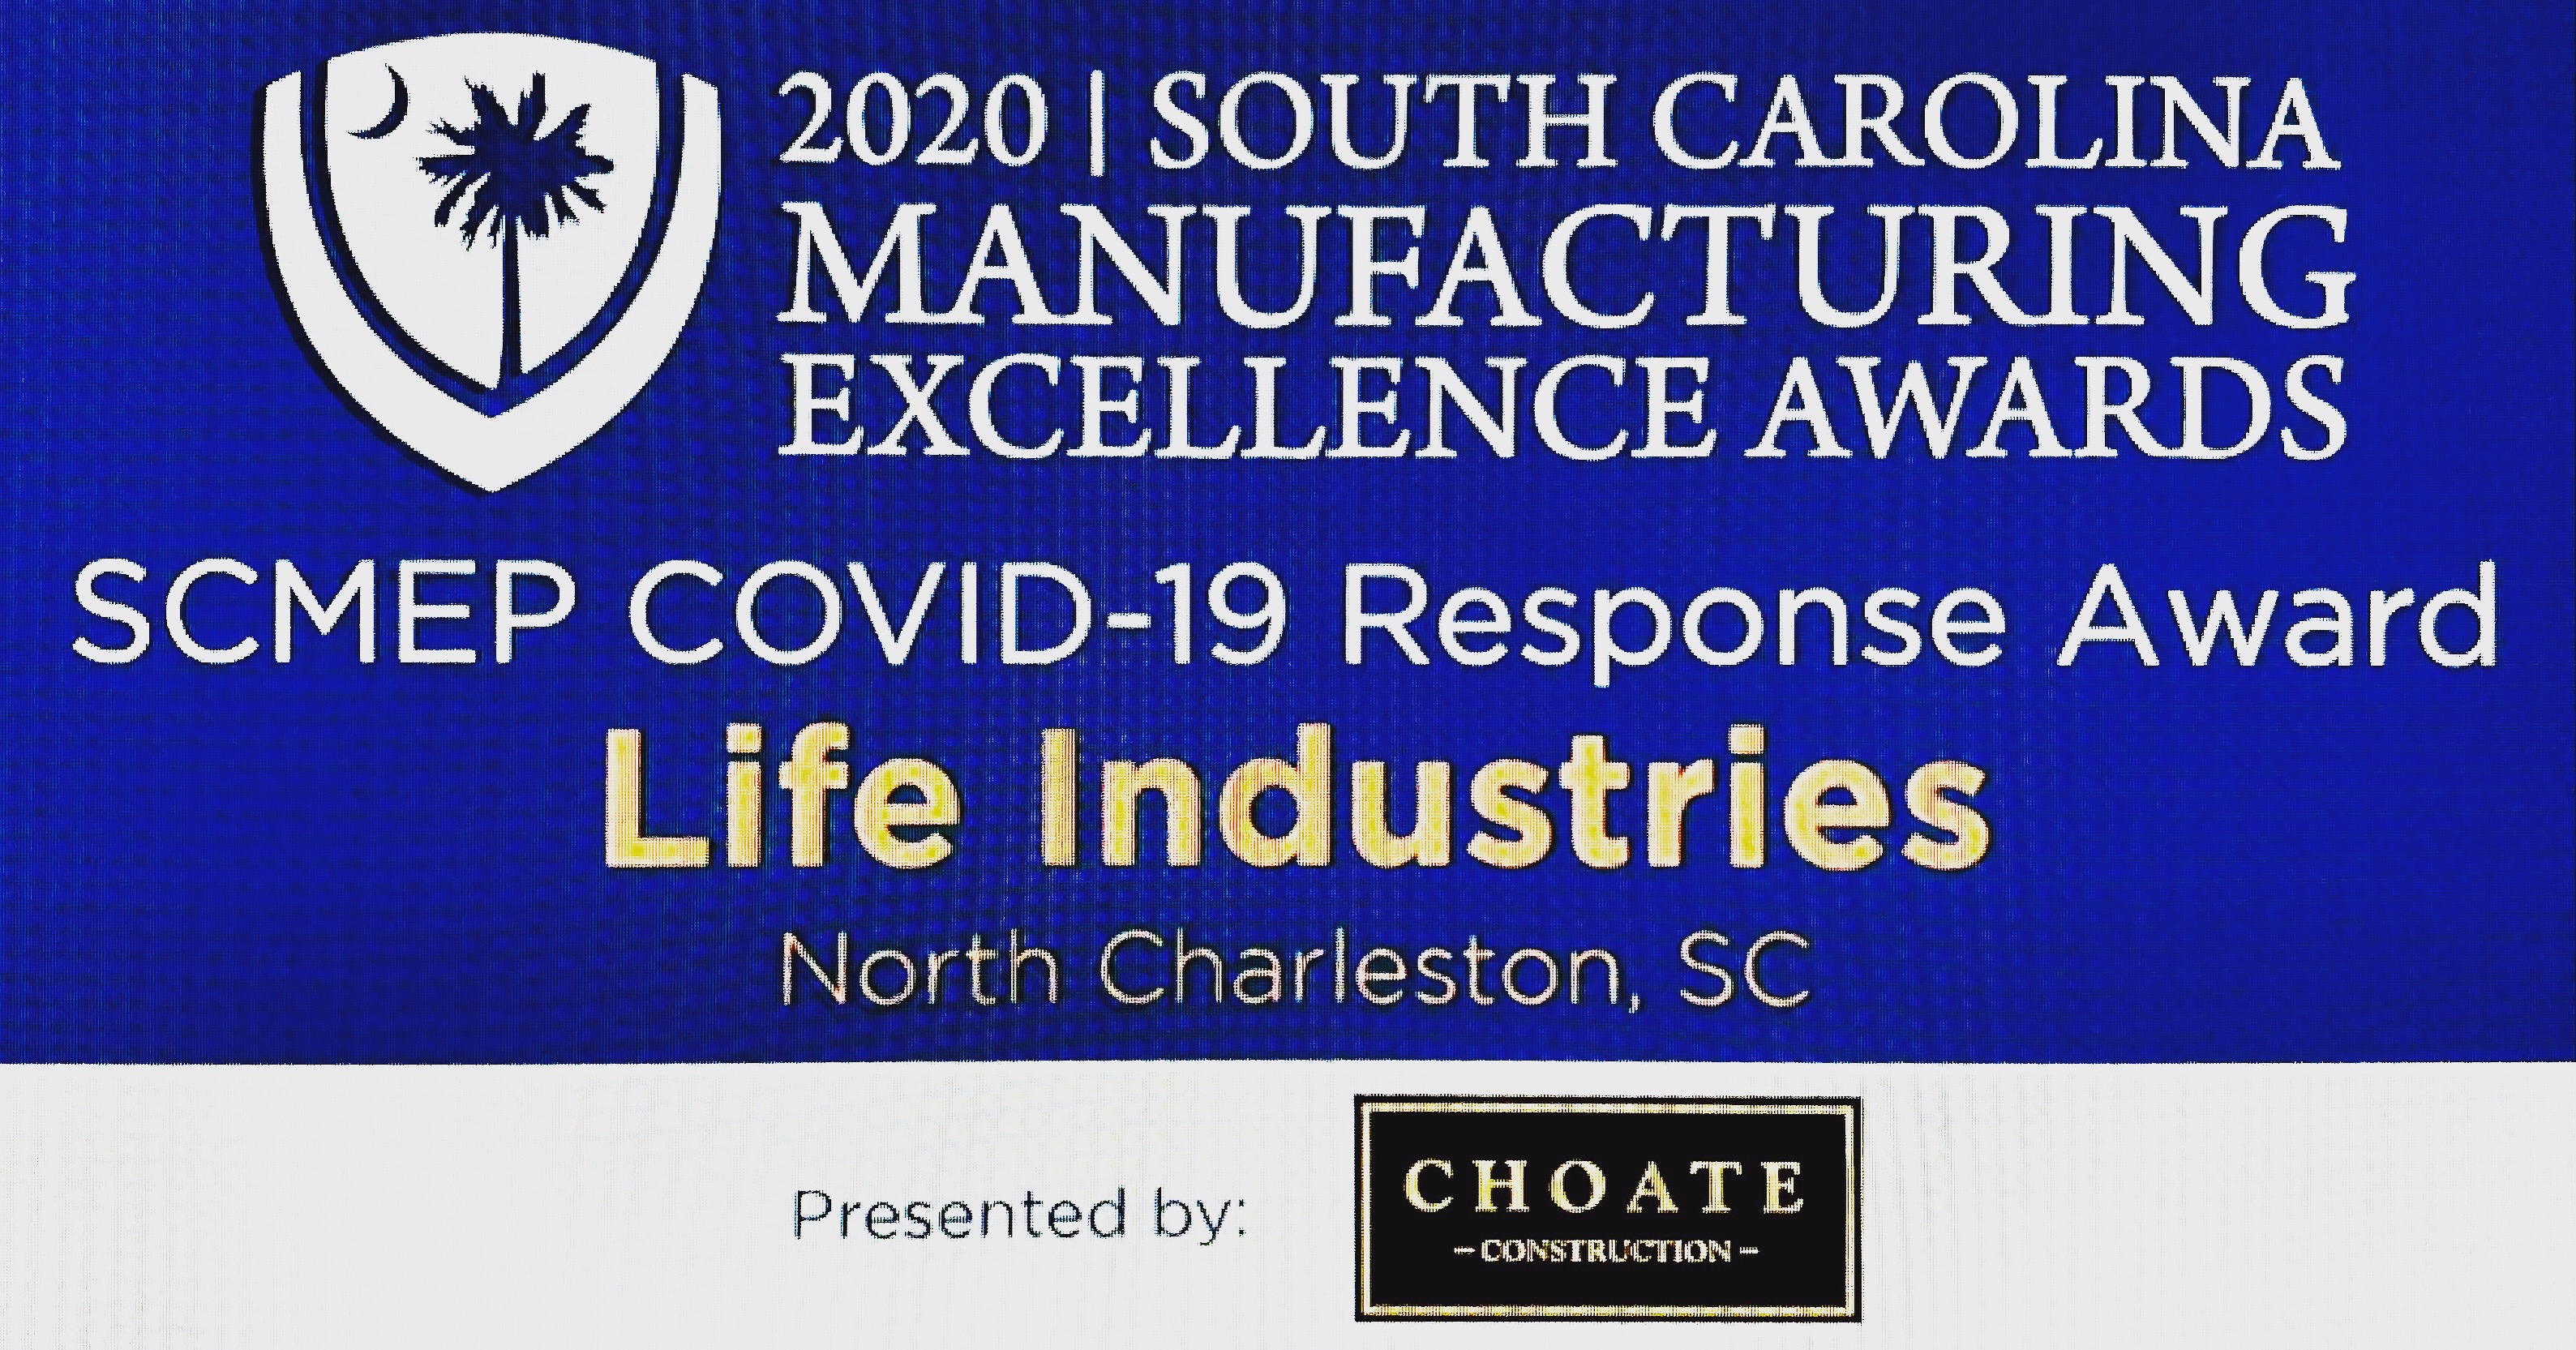 Life Industries Received an Excellence Award